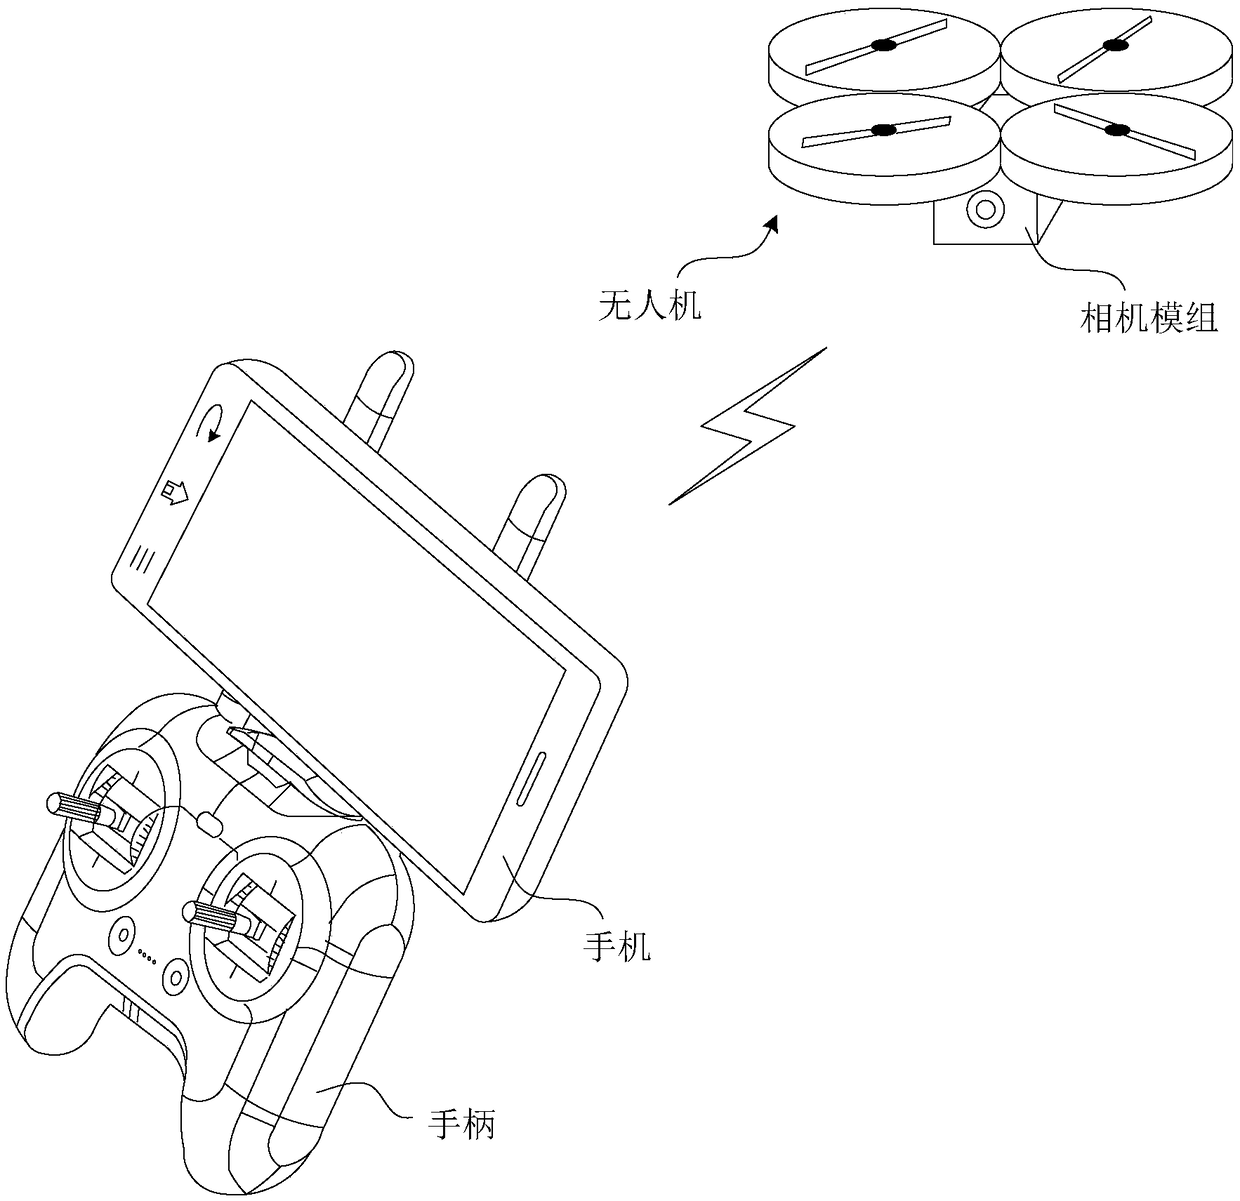 Image capturing method and device, drone